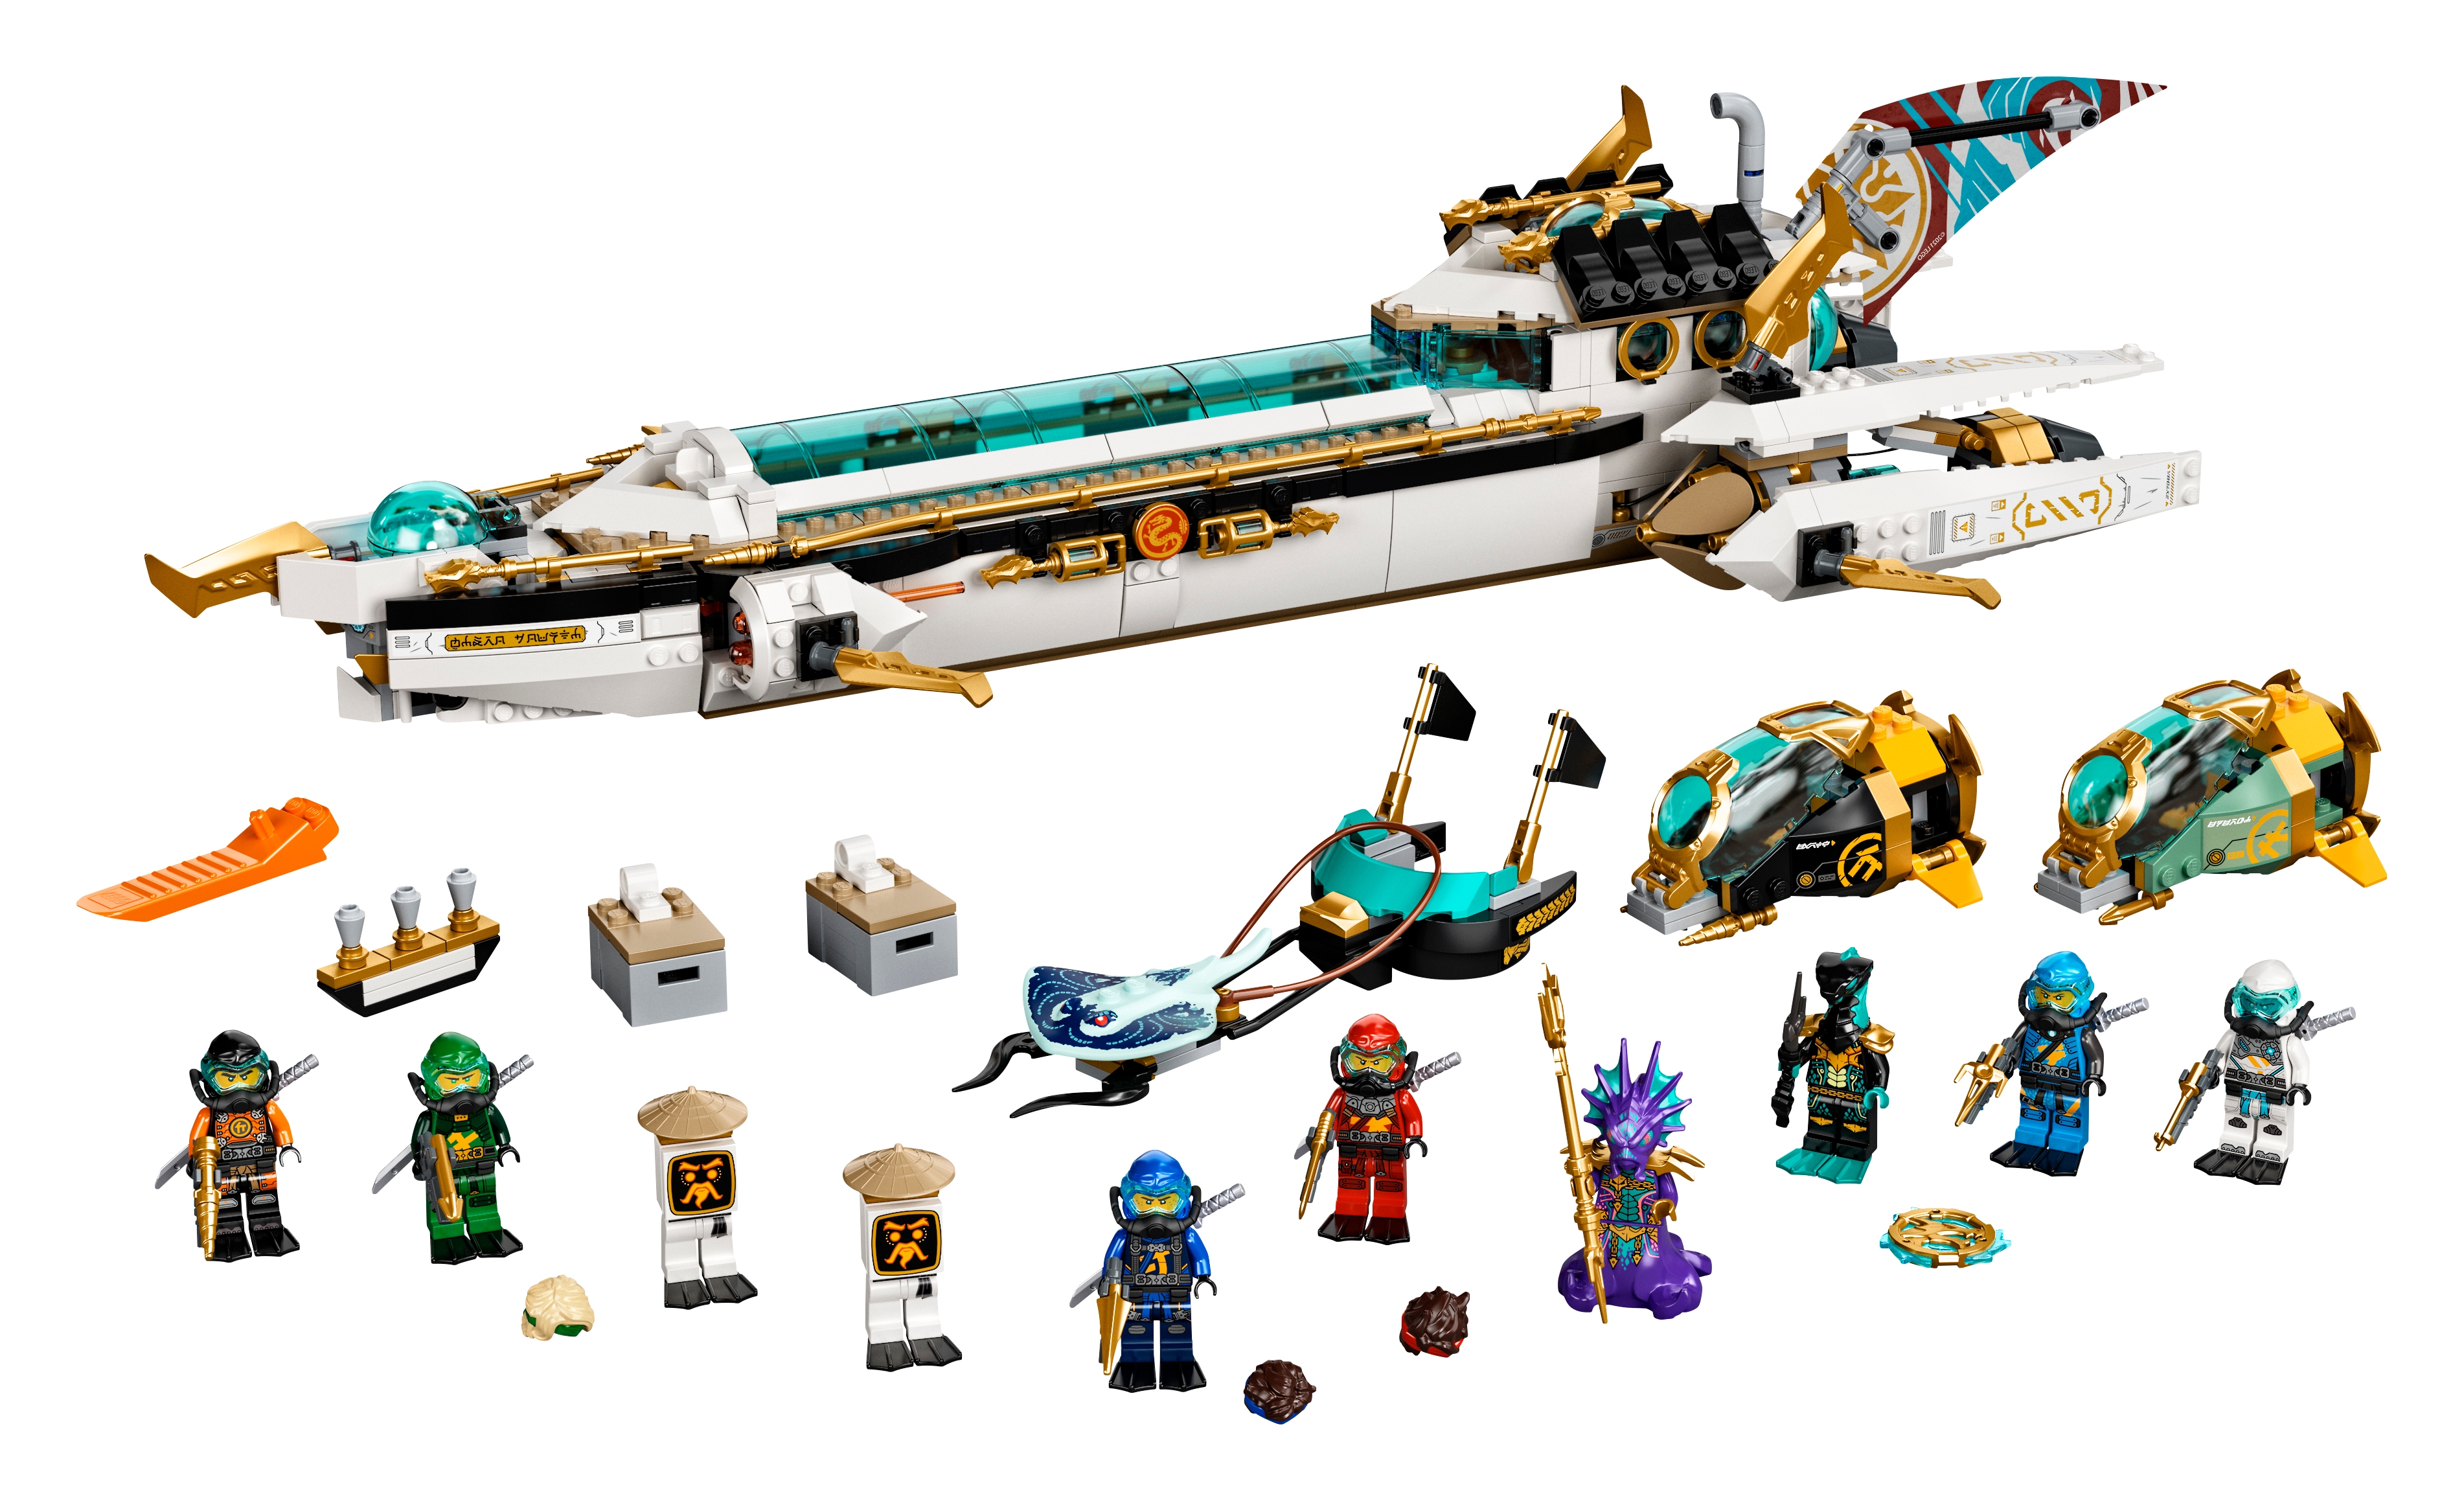 NINJAGO® Toys and Gifts | Official LEGO® Shop